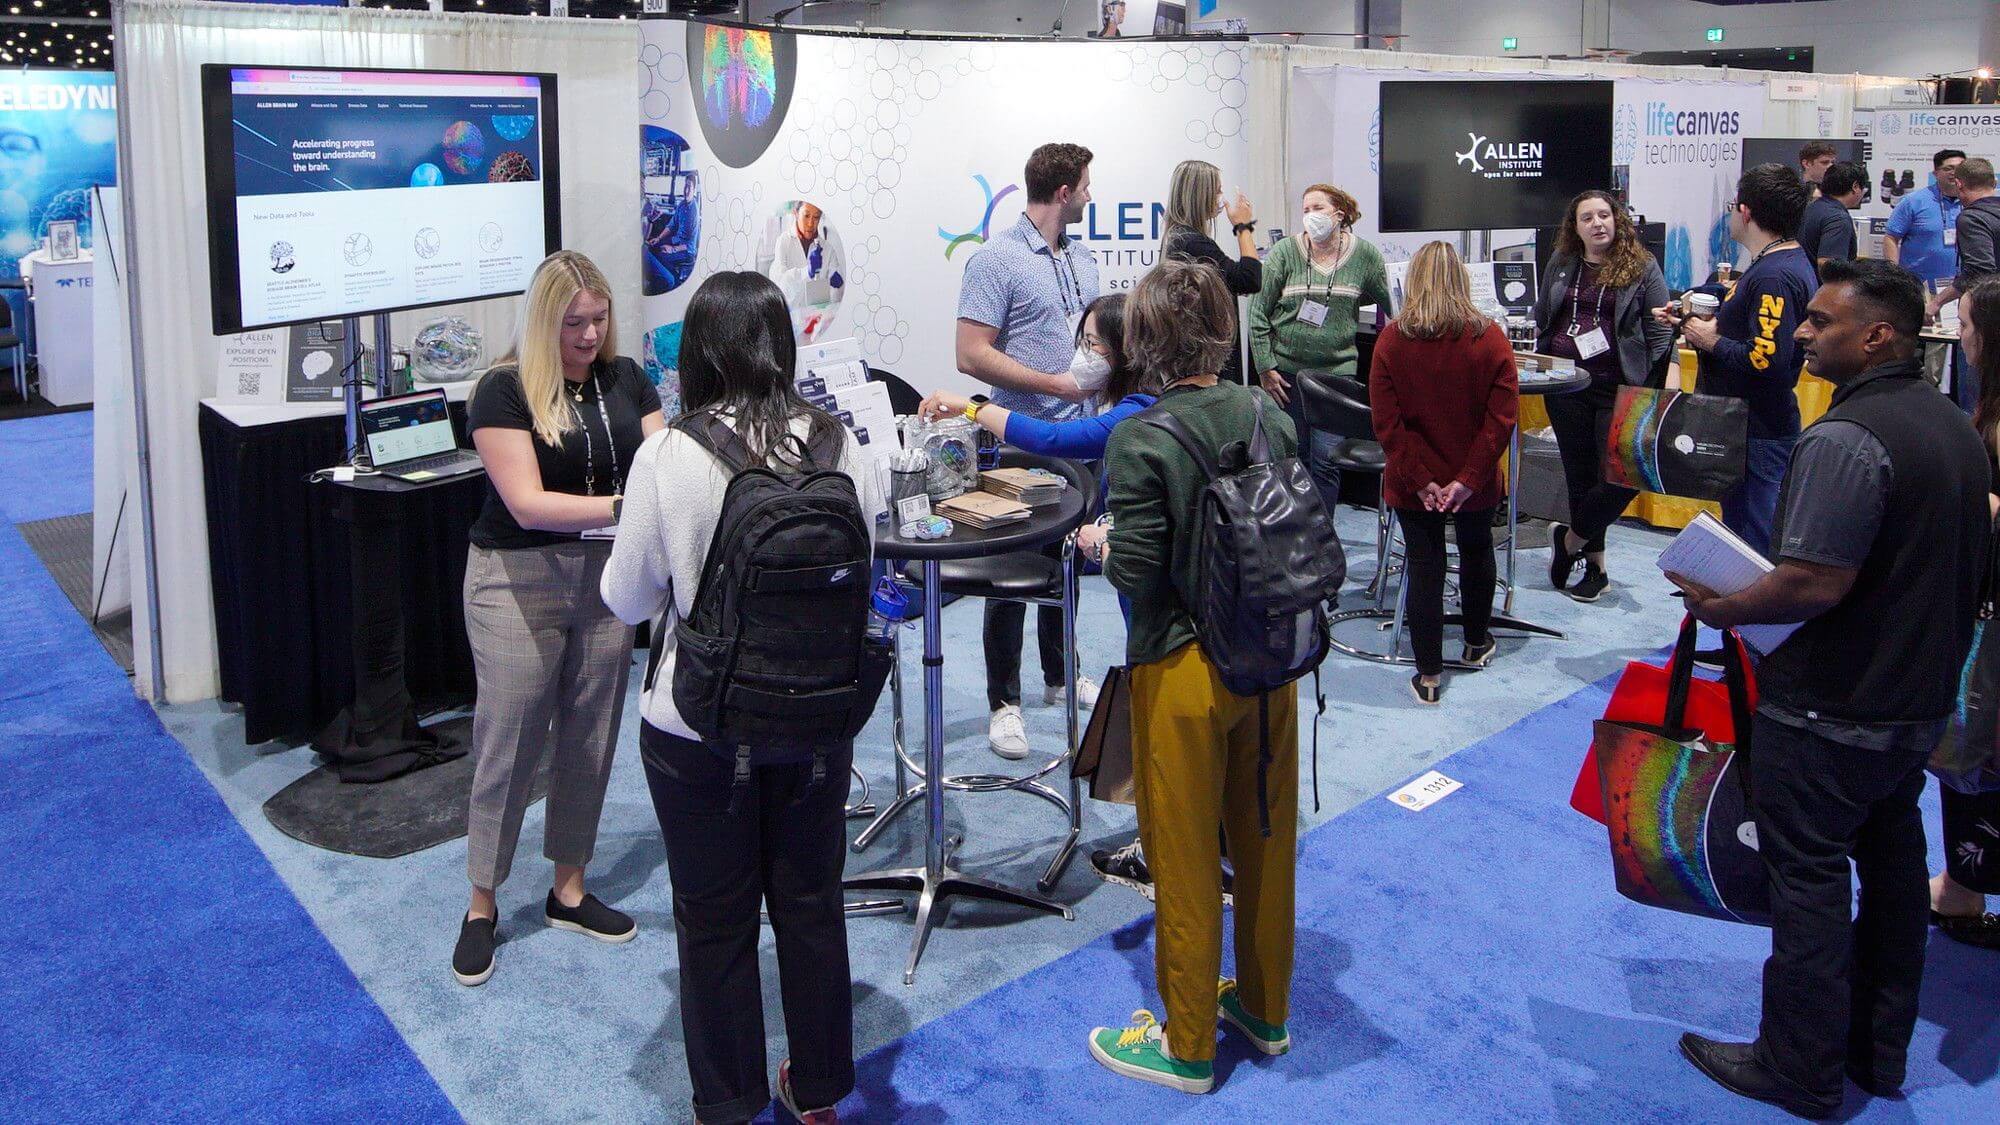 SfN attendees visiting the Allen Institute Booth